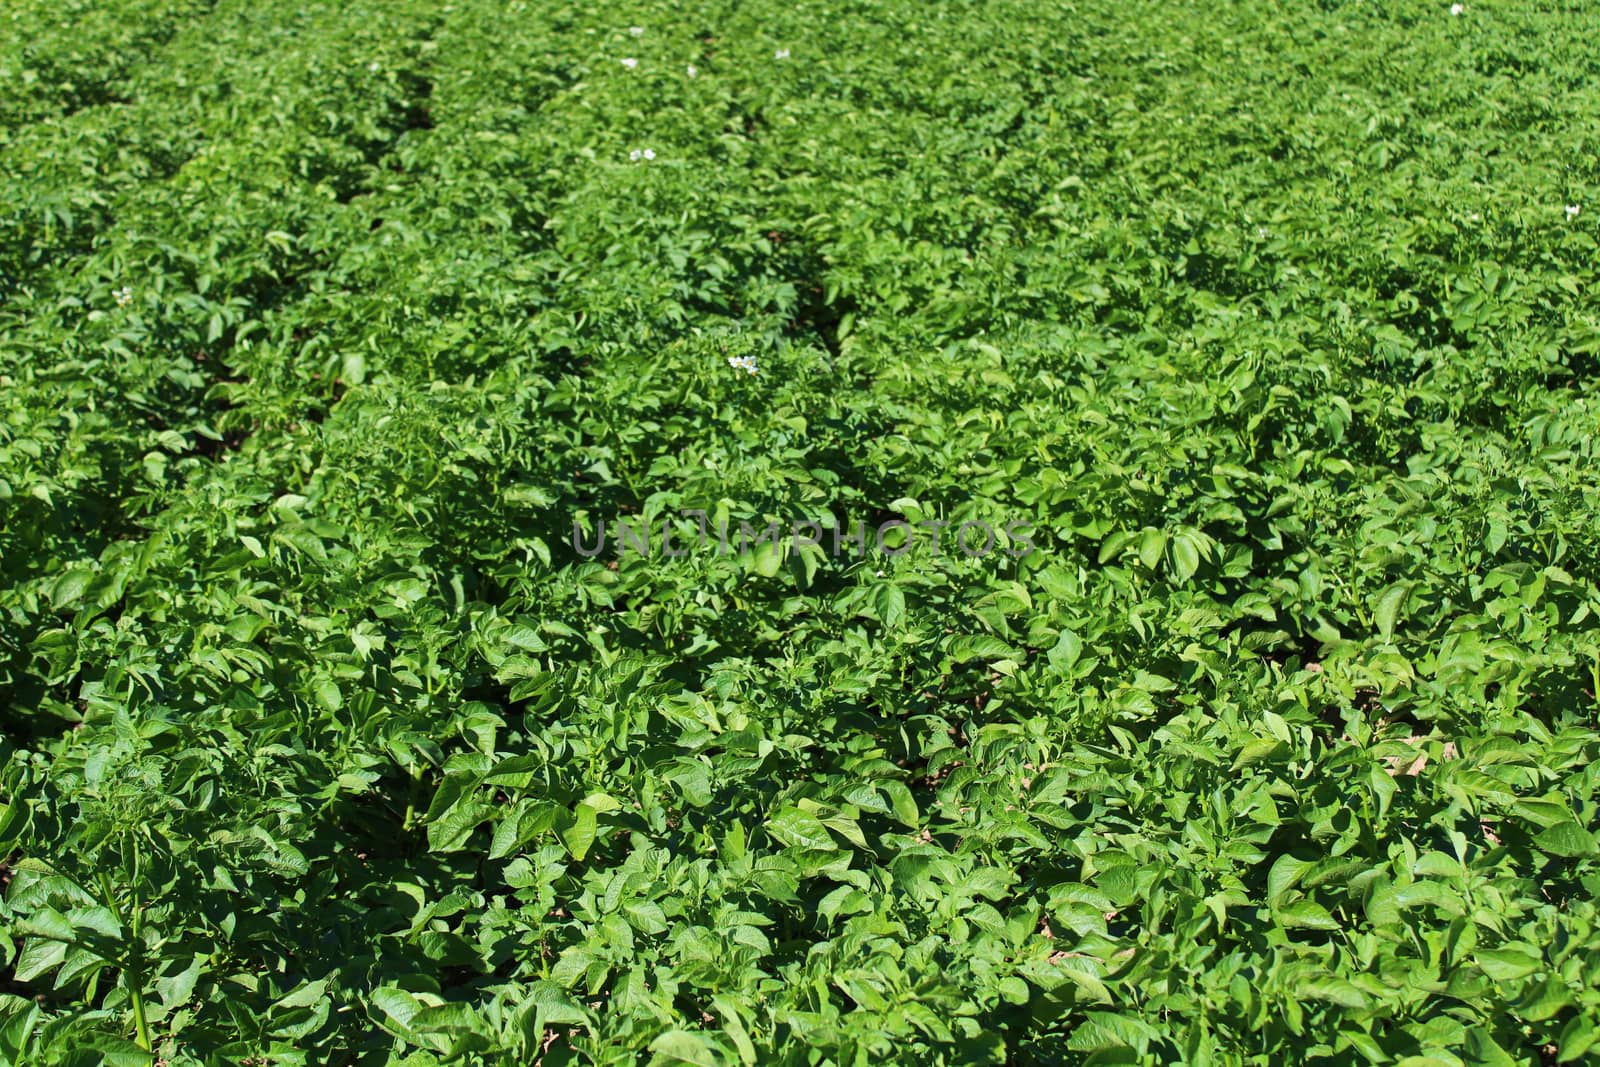 The picture shows many potato plants in the garden